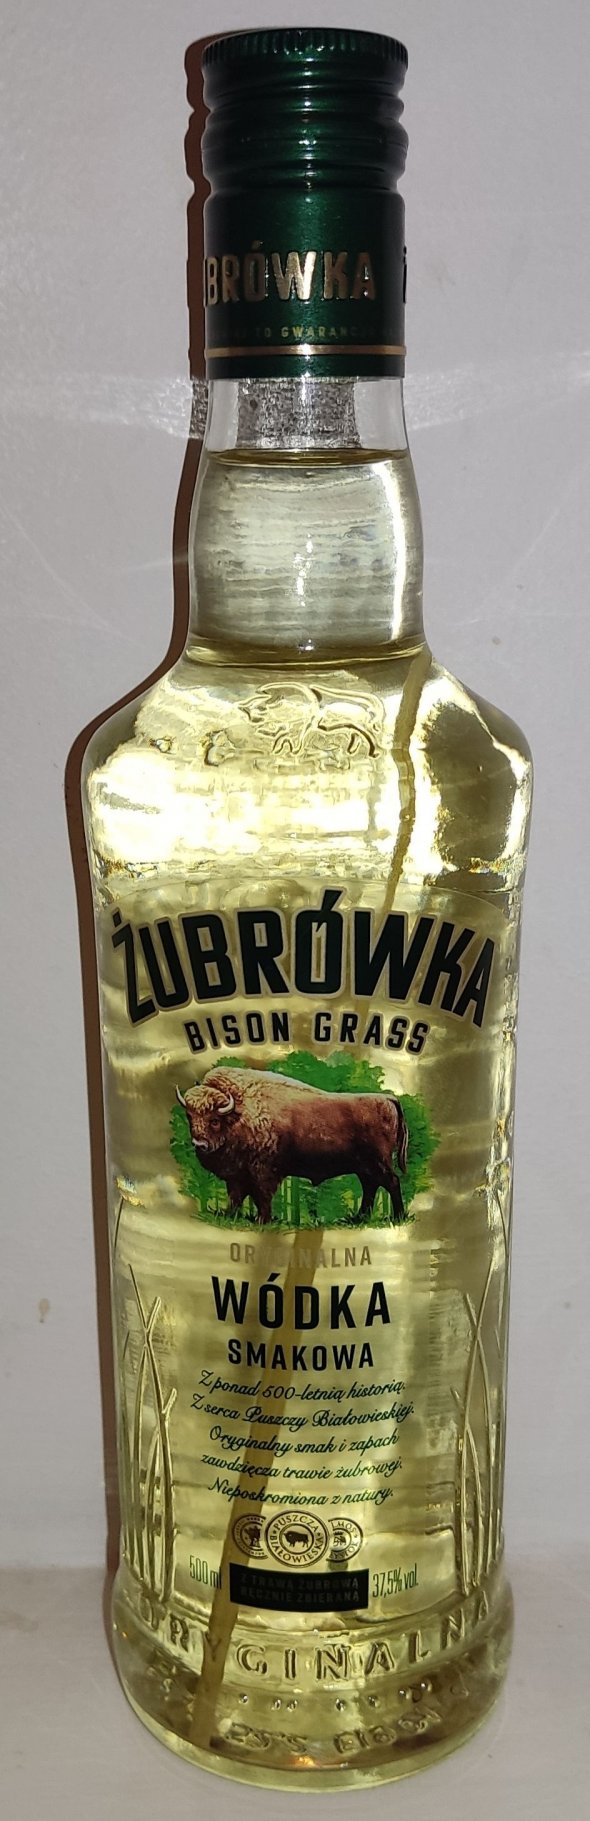 37.5%) sell Bin Ends with :: Wine Zubrowka directly and Wine. Bison Buy Fine wine Rare other and Marketplace, Grass Vintage Wine, users Vodka (Abv